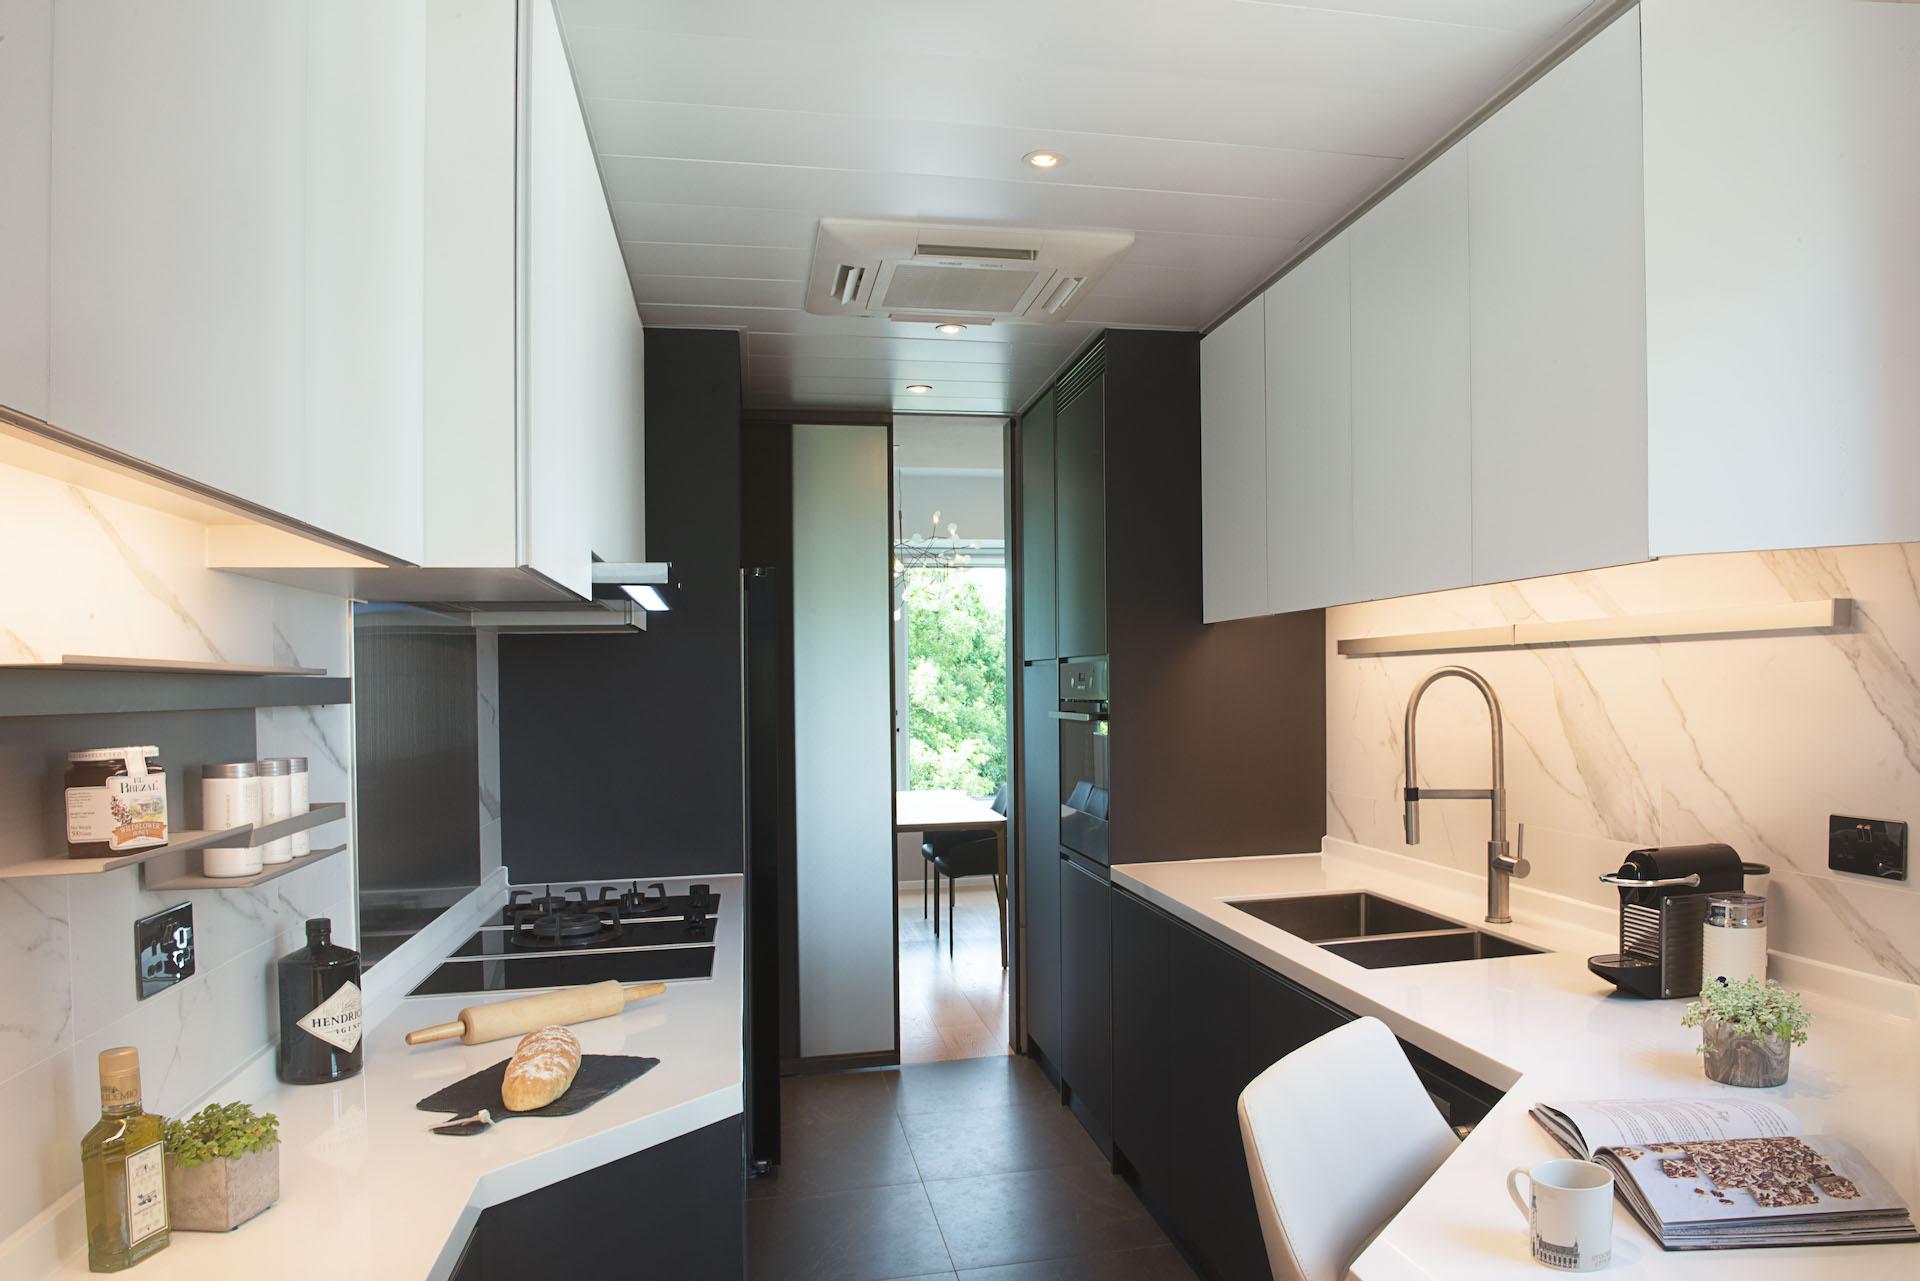 A 1,400-sq.ft. Apartment in Sai Kung Brims With Countryside Appeal